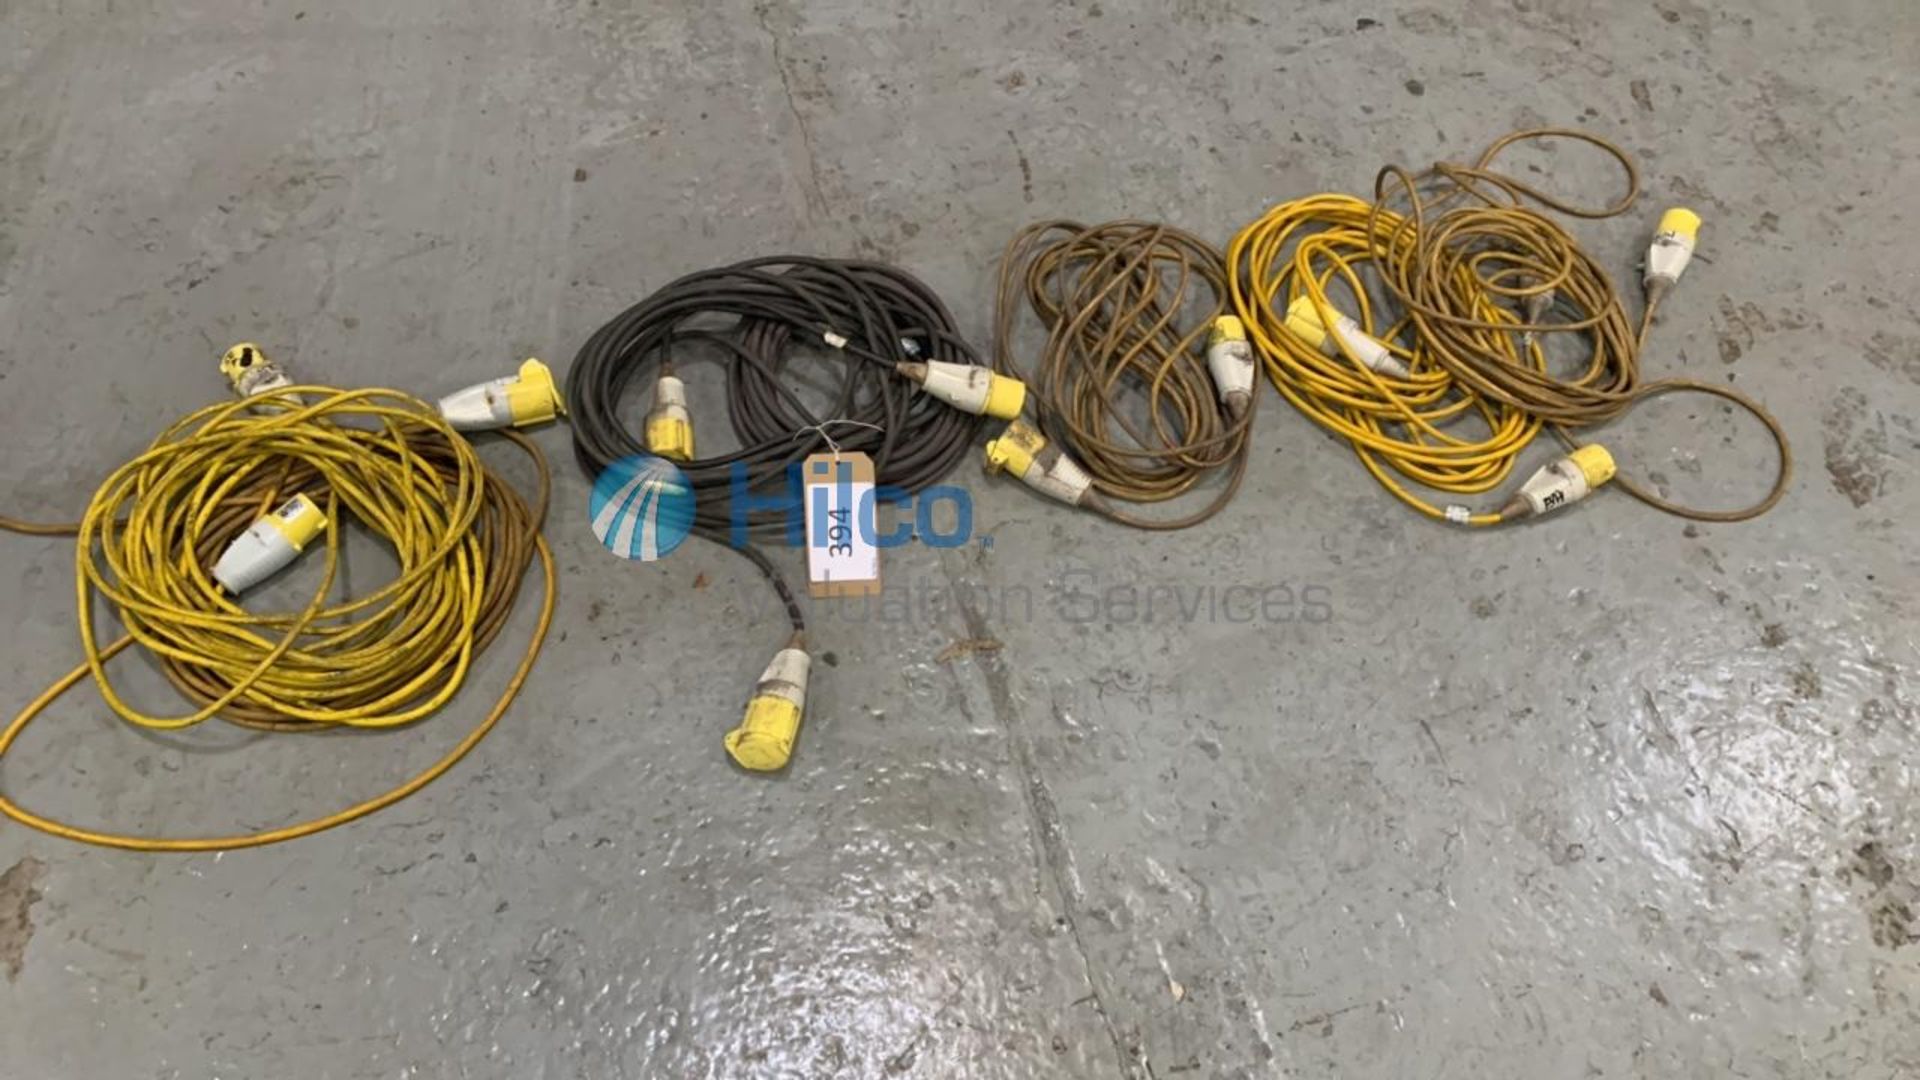 Quantity of 110v Extension Cable